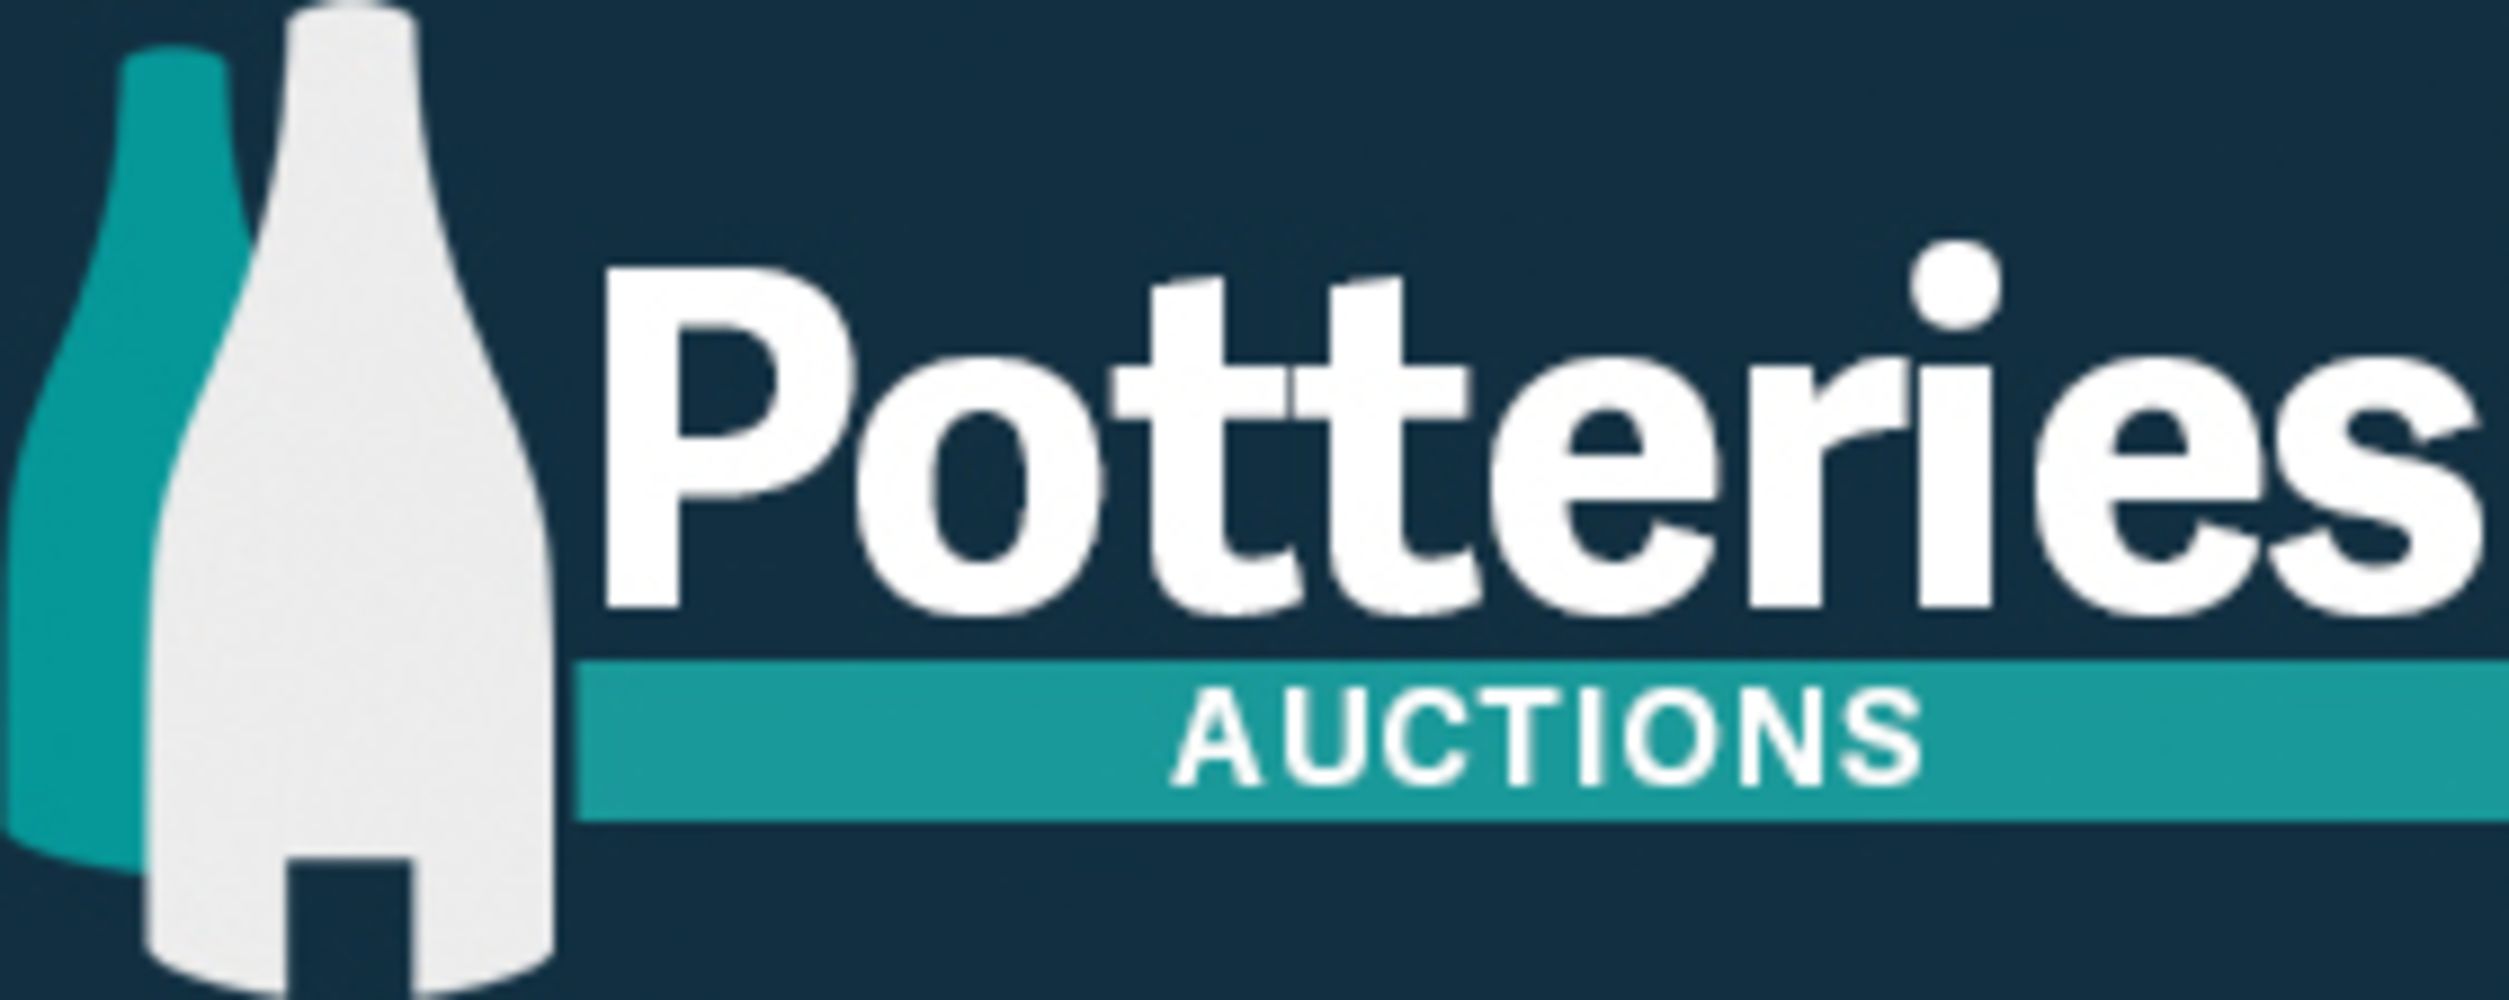 COBRIDGE SALEROOM, ST6 3HR - April 16th 2023 Auction of unreserved Items, British Pottery, Furniture & Household Items.